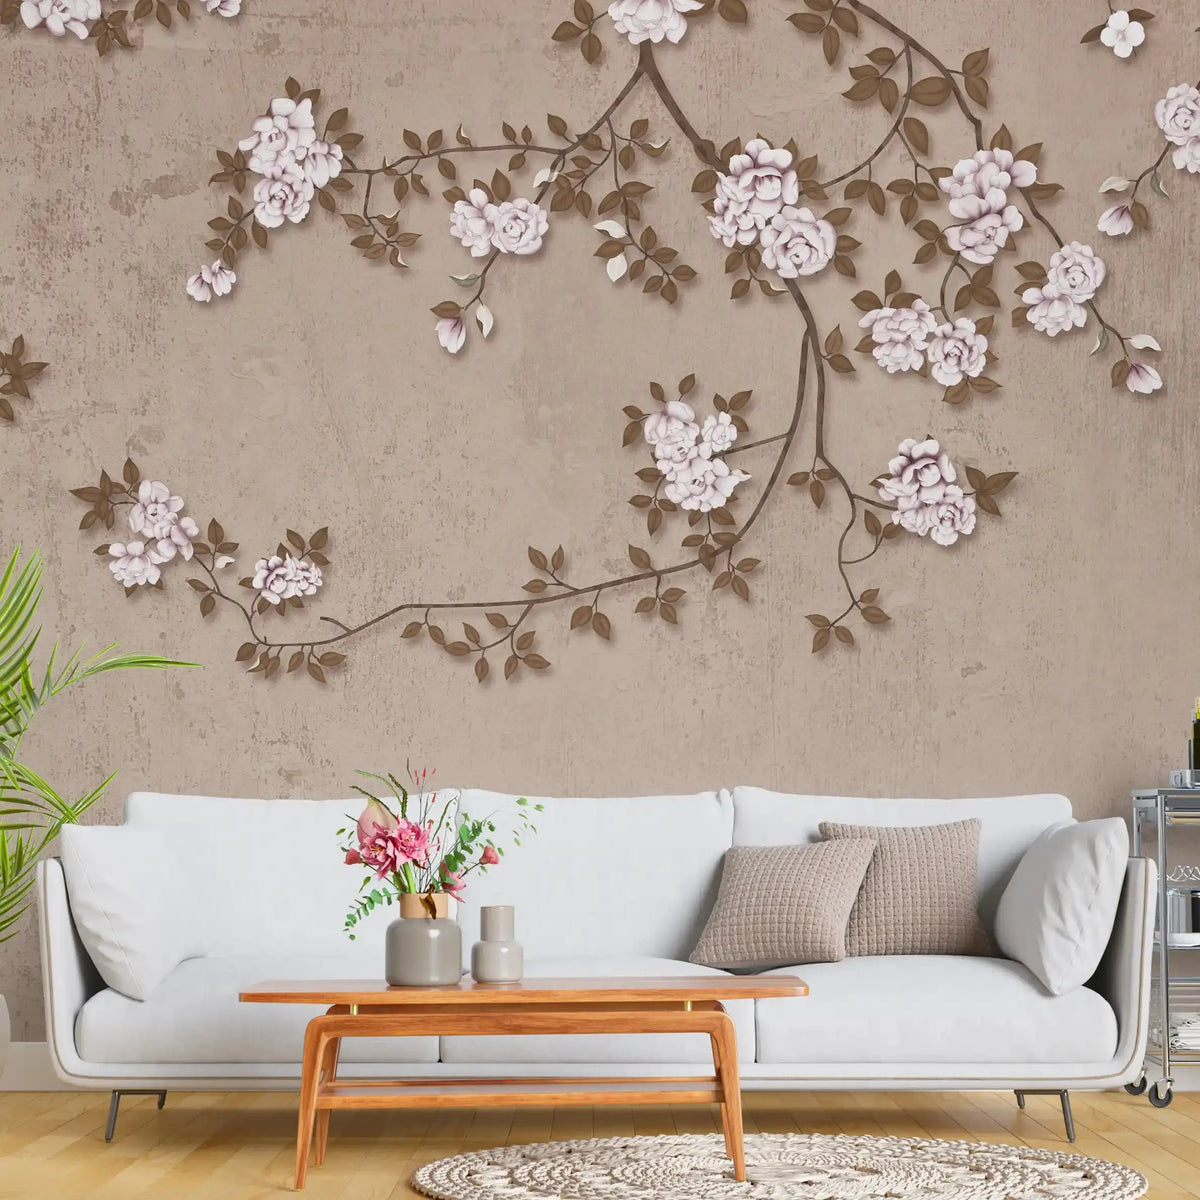 3028-D / Chinese Style Floral Peel and Stick Wallpaper: Easy Install, Adhesive Mural for Walls - Artevella